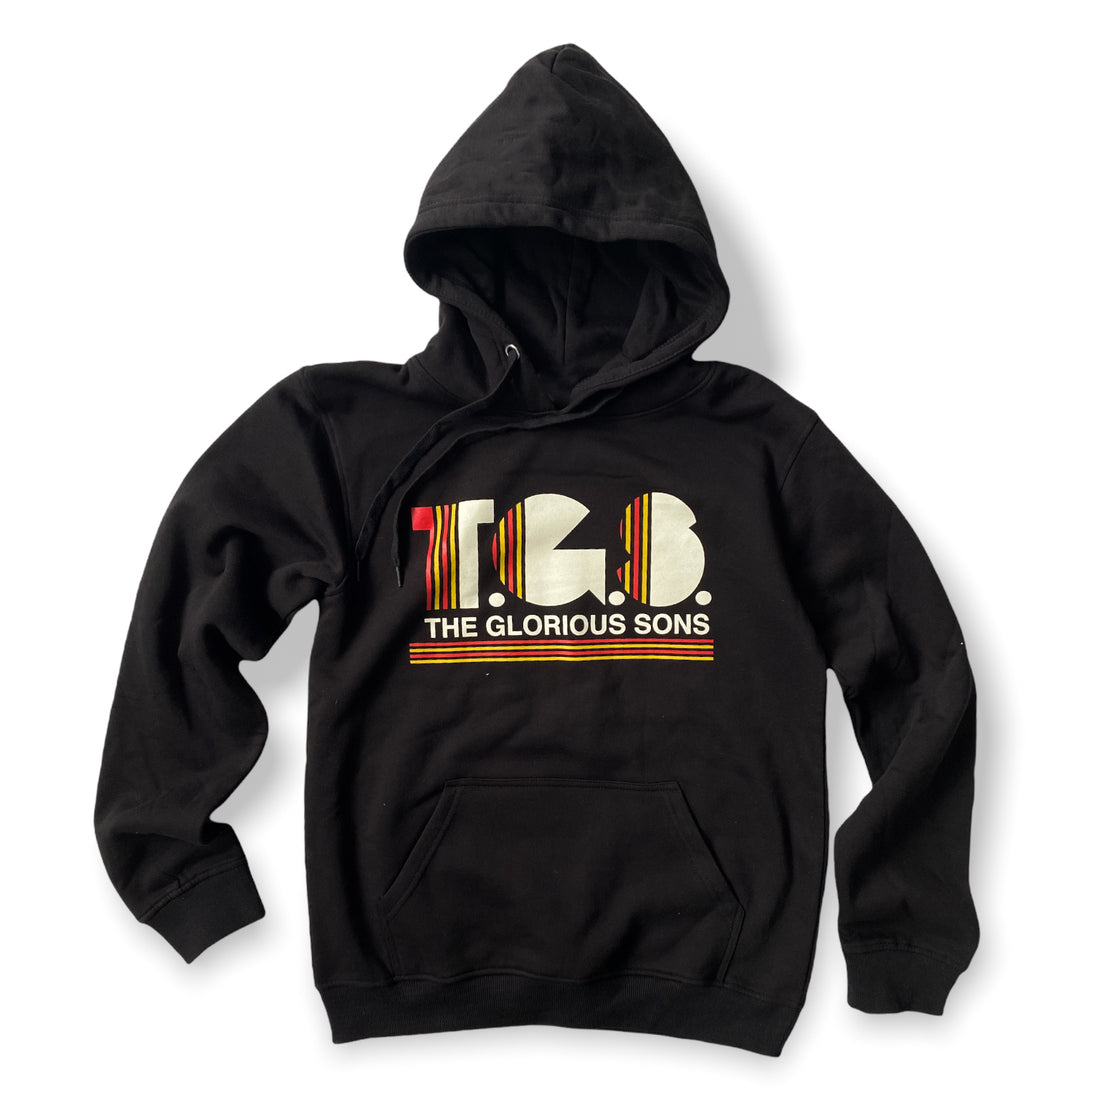 The Glorious Sons - BBC - Black Pullover Hoodie